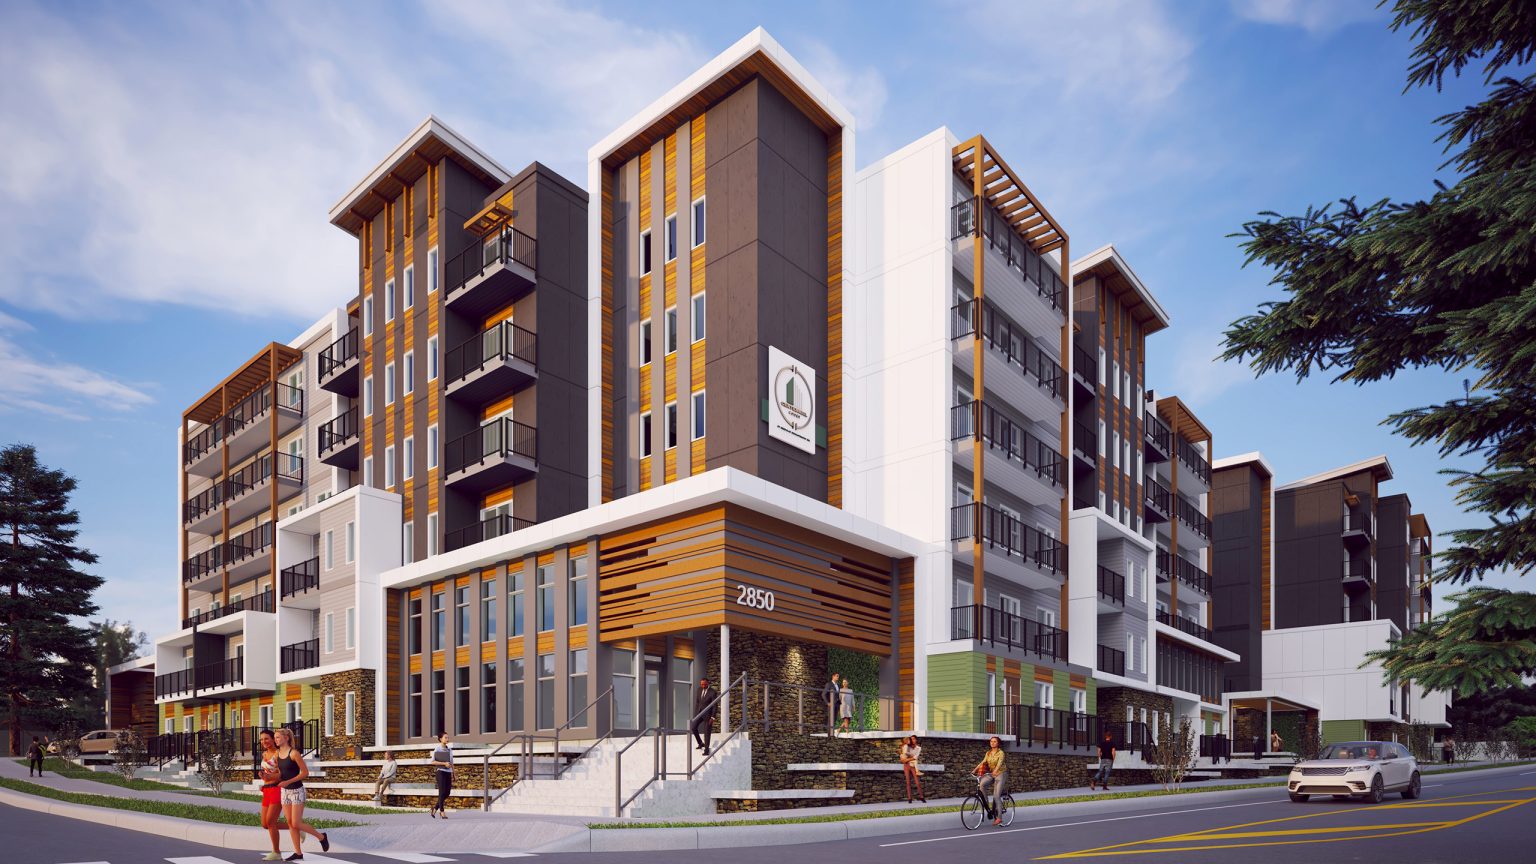 A collection of 155 attainable Langford condominiums with a rent-to-own program.